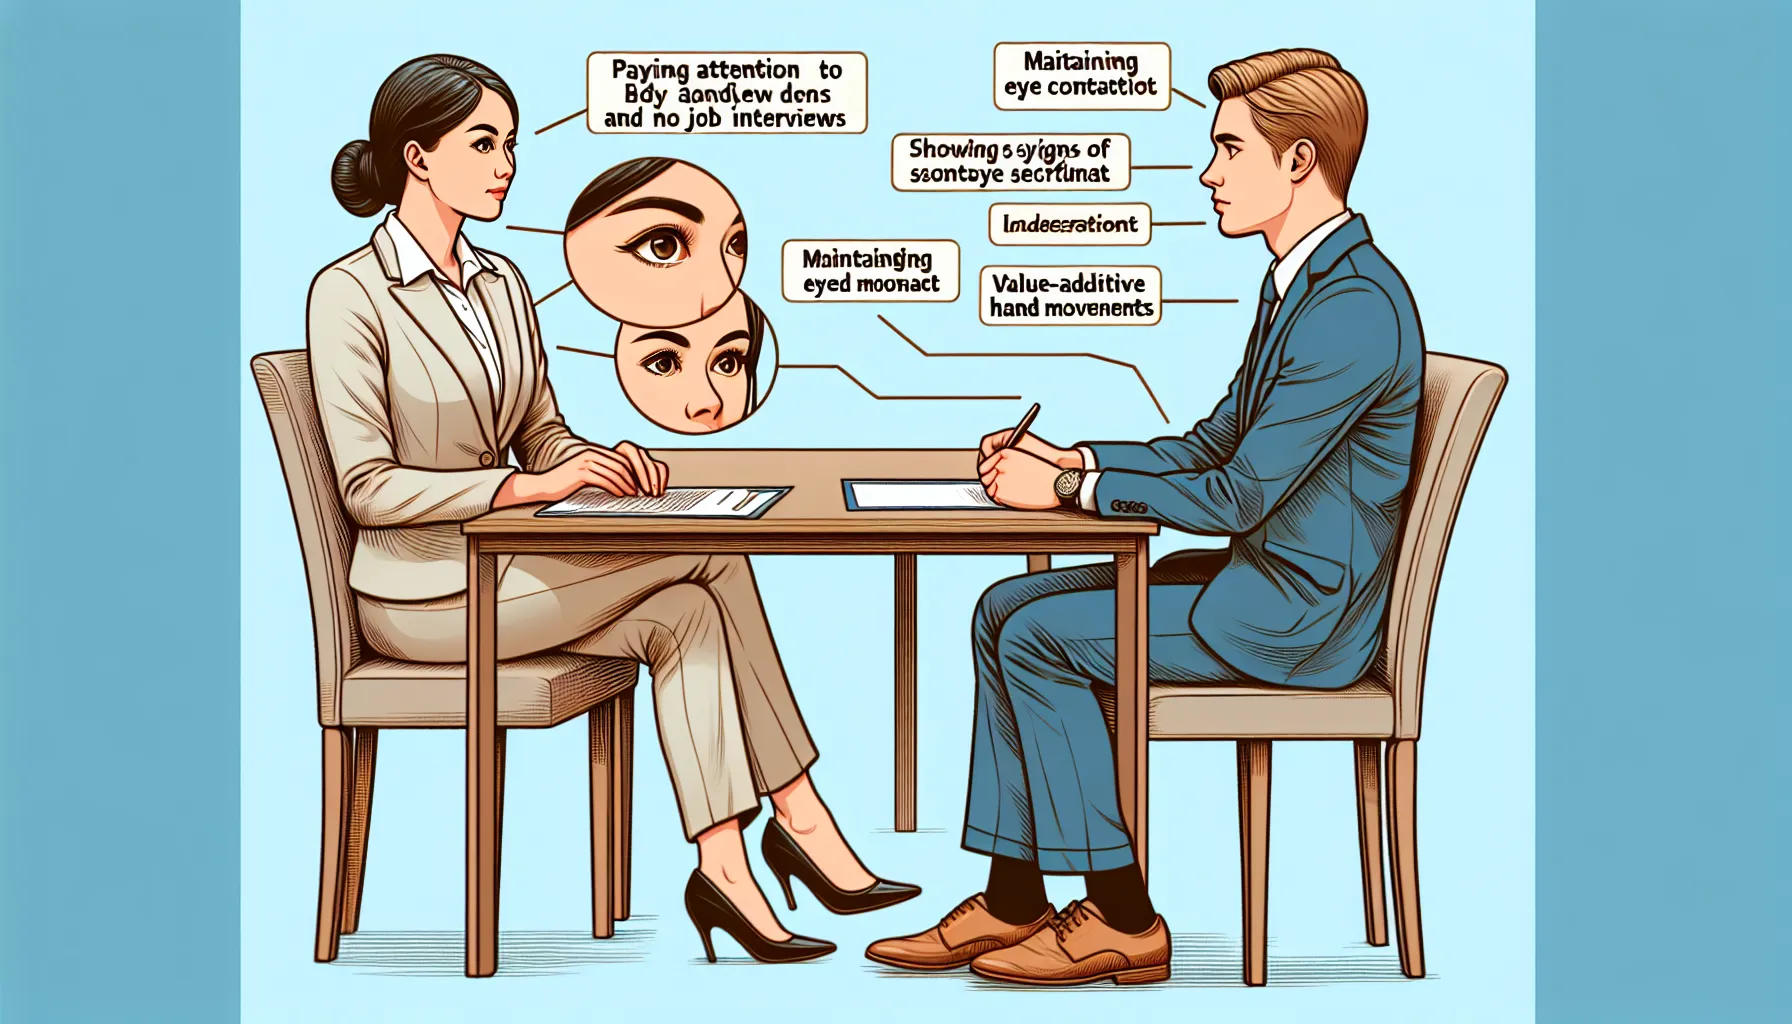 Paying Attention to Body Language and Non-Verbal Cues in Job Interviews